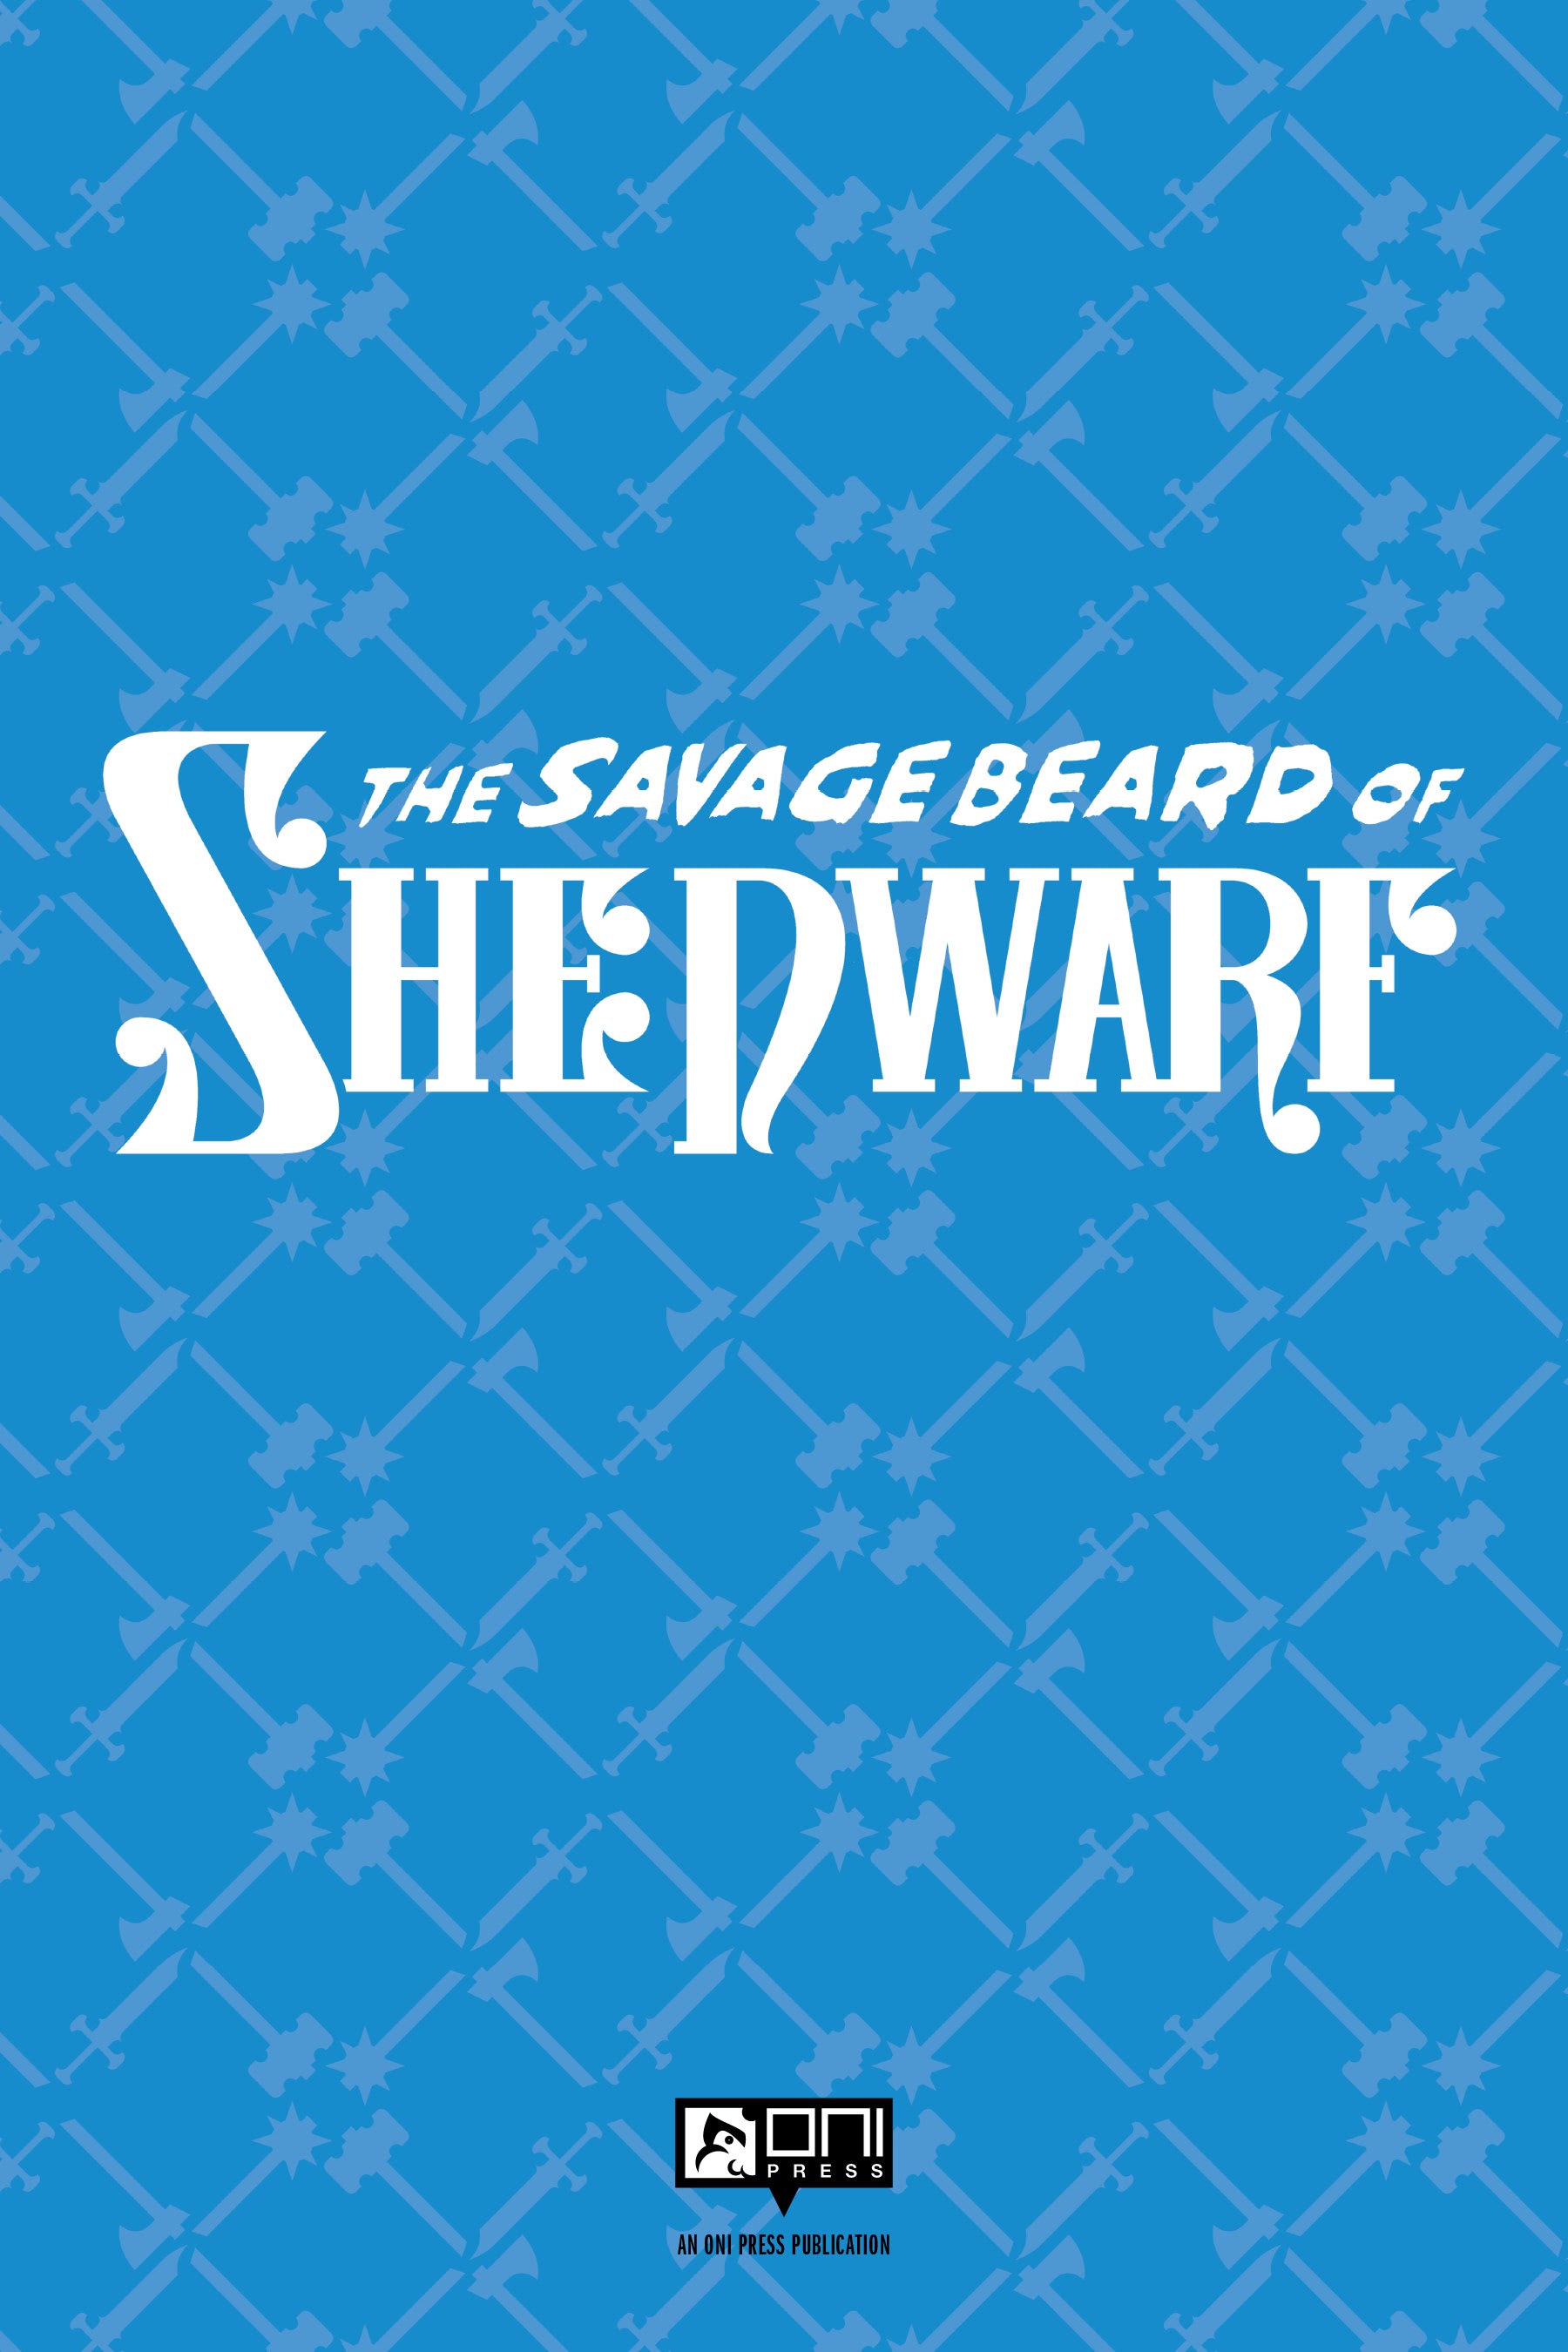 Read online The Savage Beard of She Dwarf comic -  Issue # TPB (Part 1) - 2